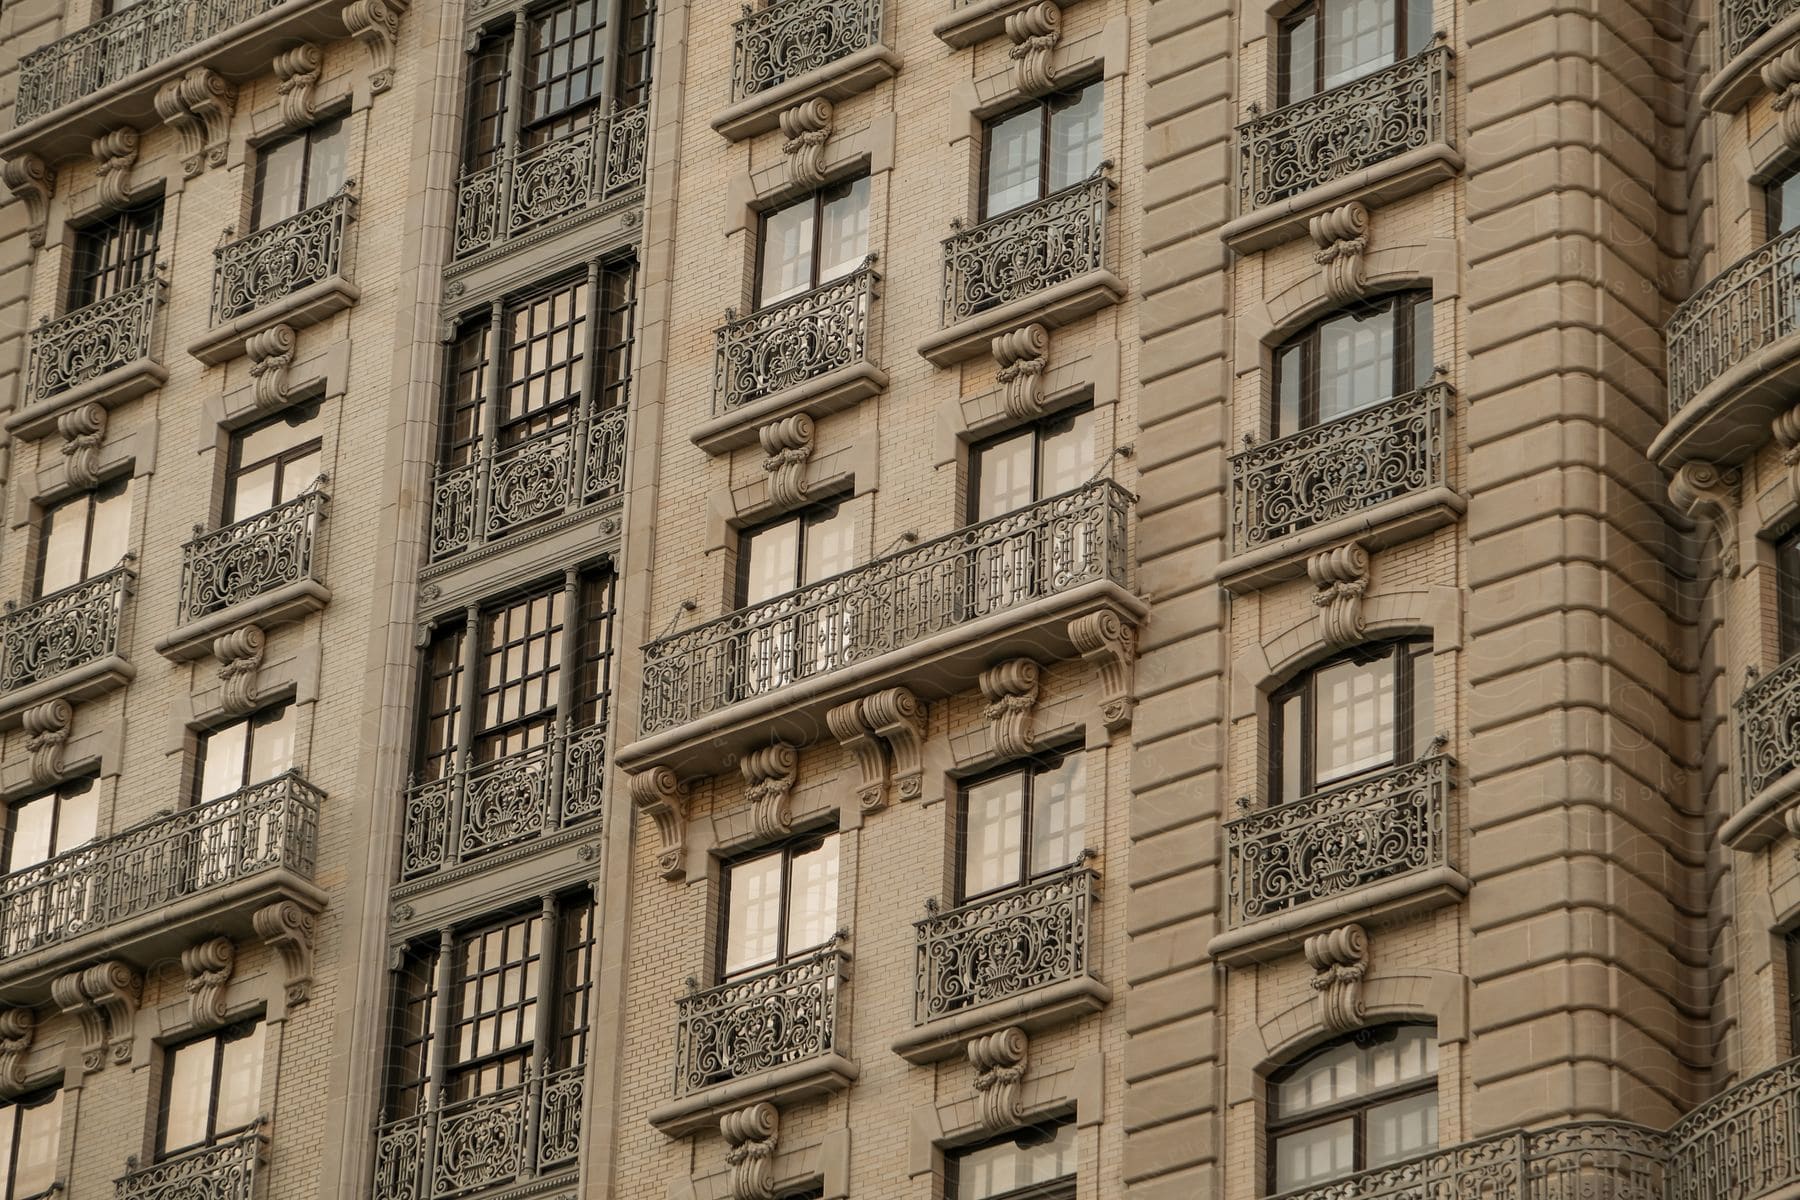 An ornate stone apartment building with wrought iron balconies